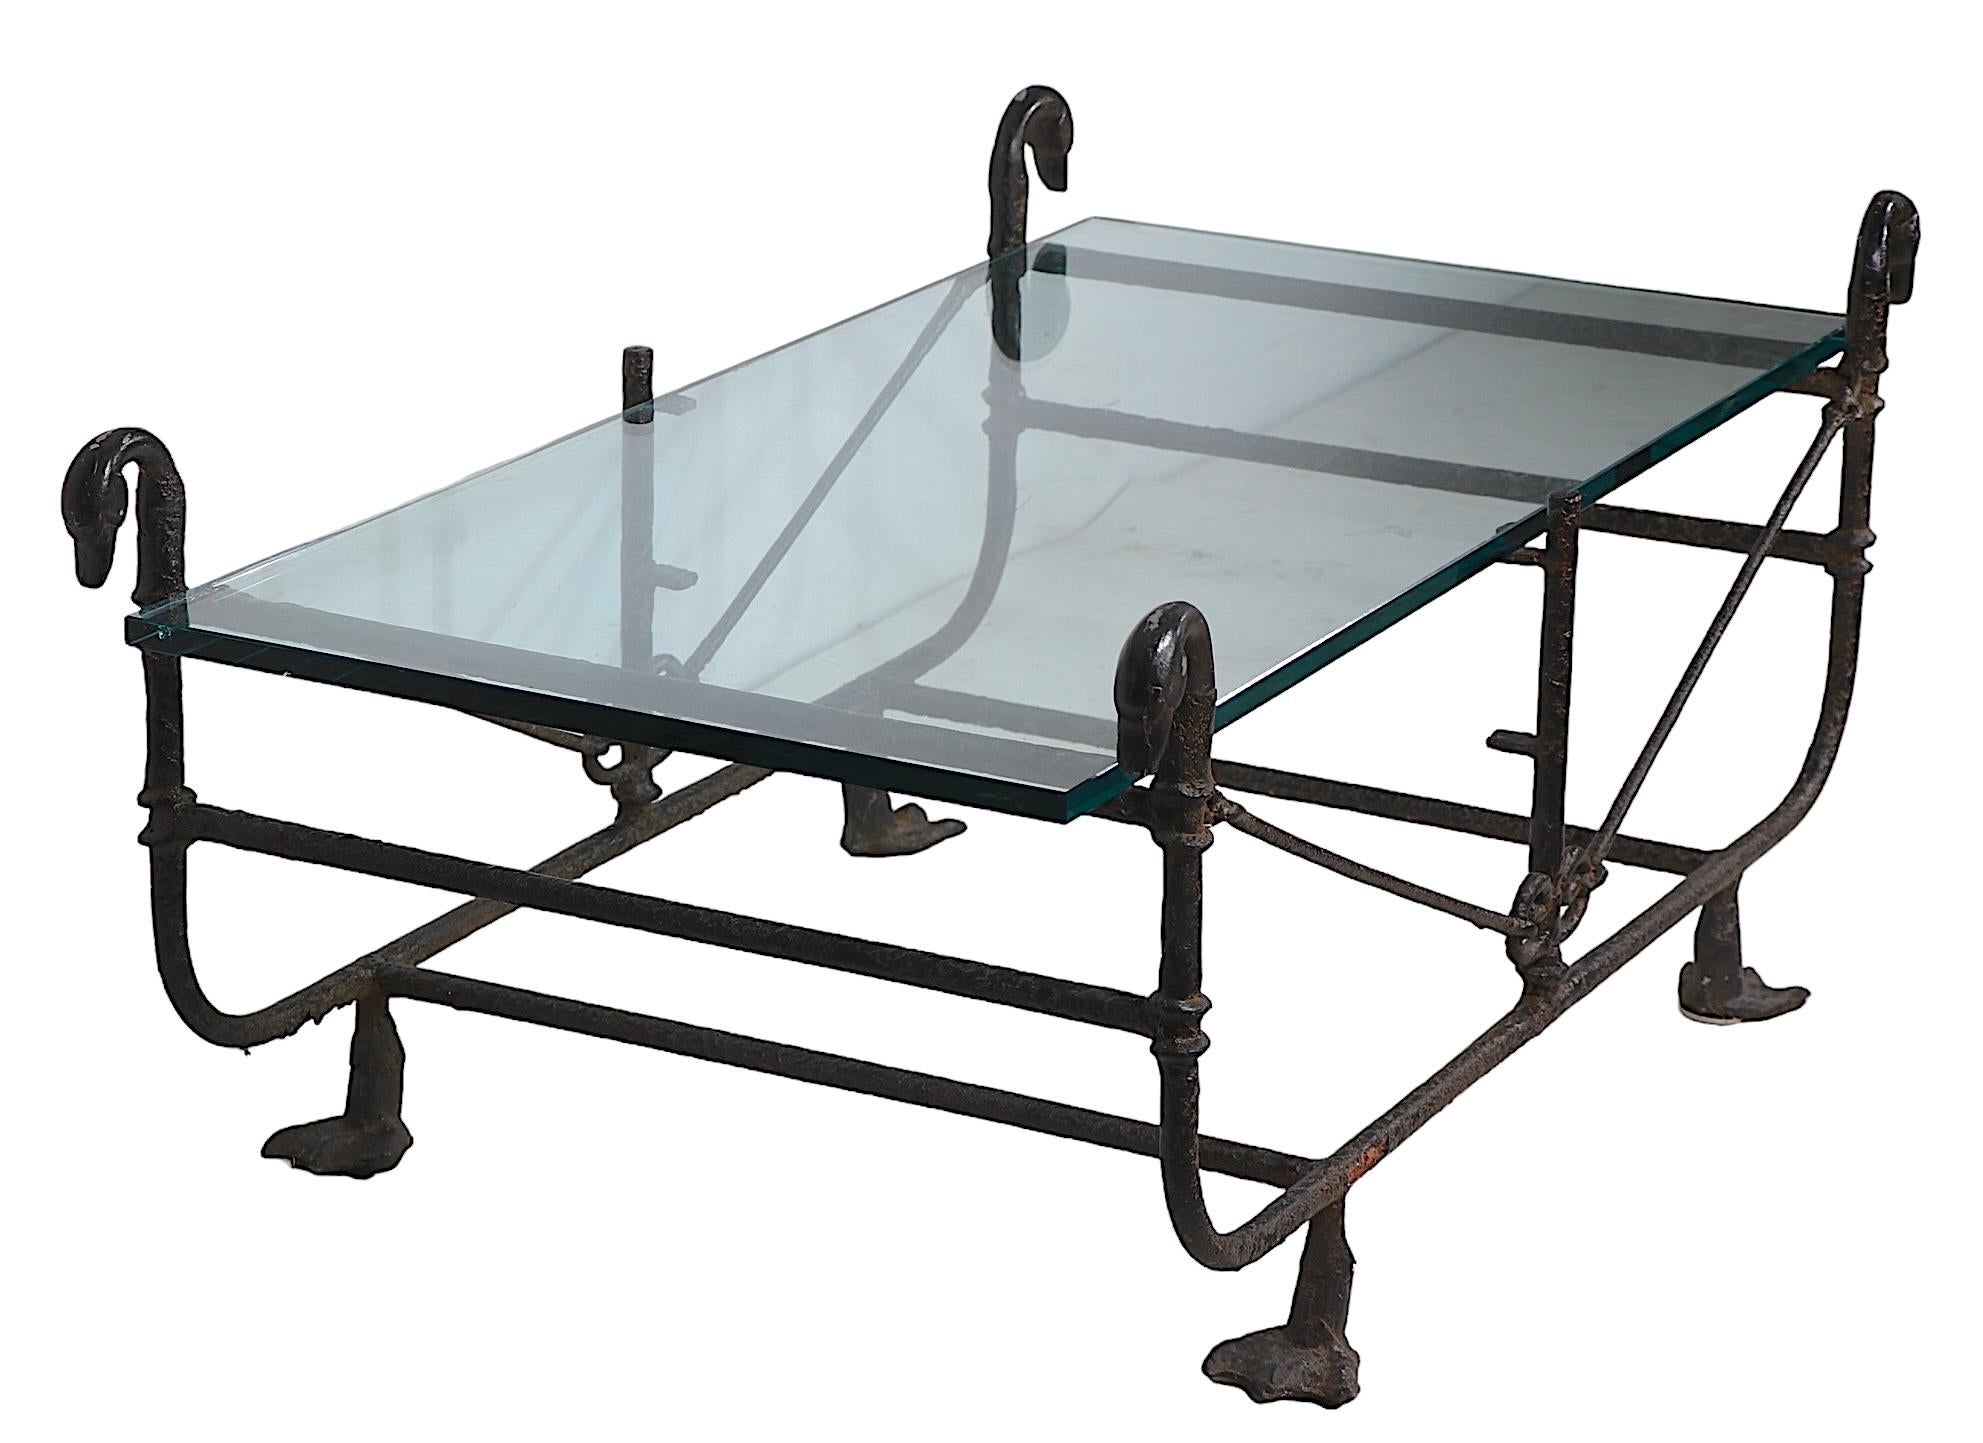 Wrought Iron and Glass Etruscan Coffee Table bib Paul Ferrante  after Giacometti In Good Condition For Sale In New York, NY